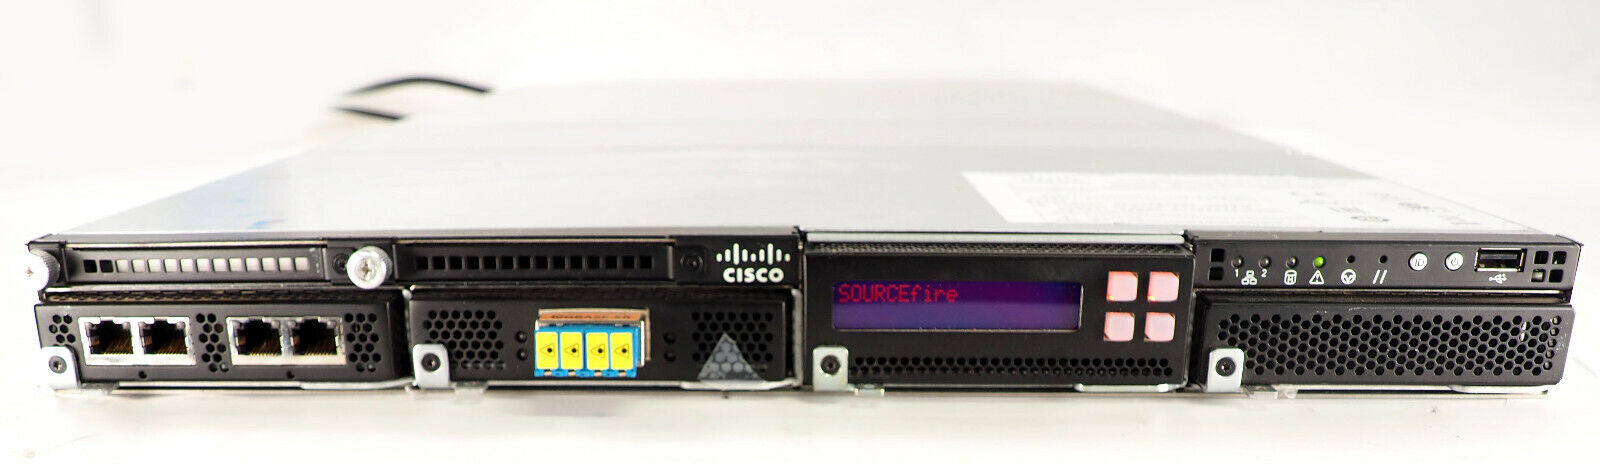 Cisco FP8130 V02 FirePOWER 8130 Security Appliance NGIPS